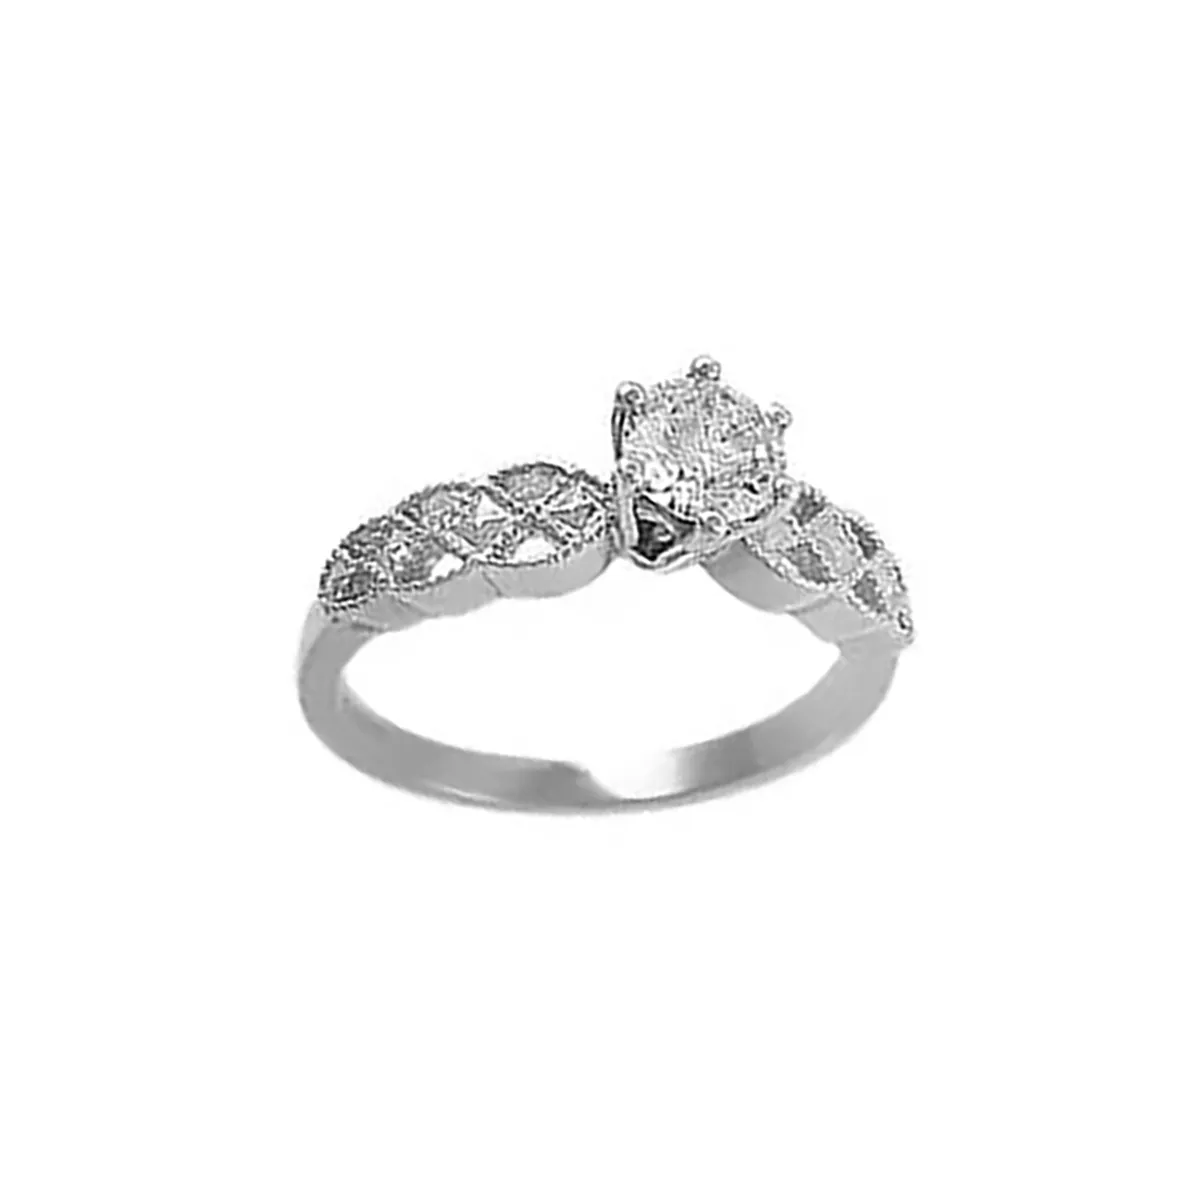 Unique Celtic Ring, Set With A Single Stone Solitaire Diamond, 0.50cts...